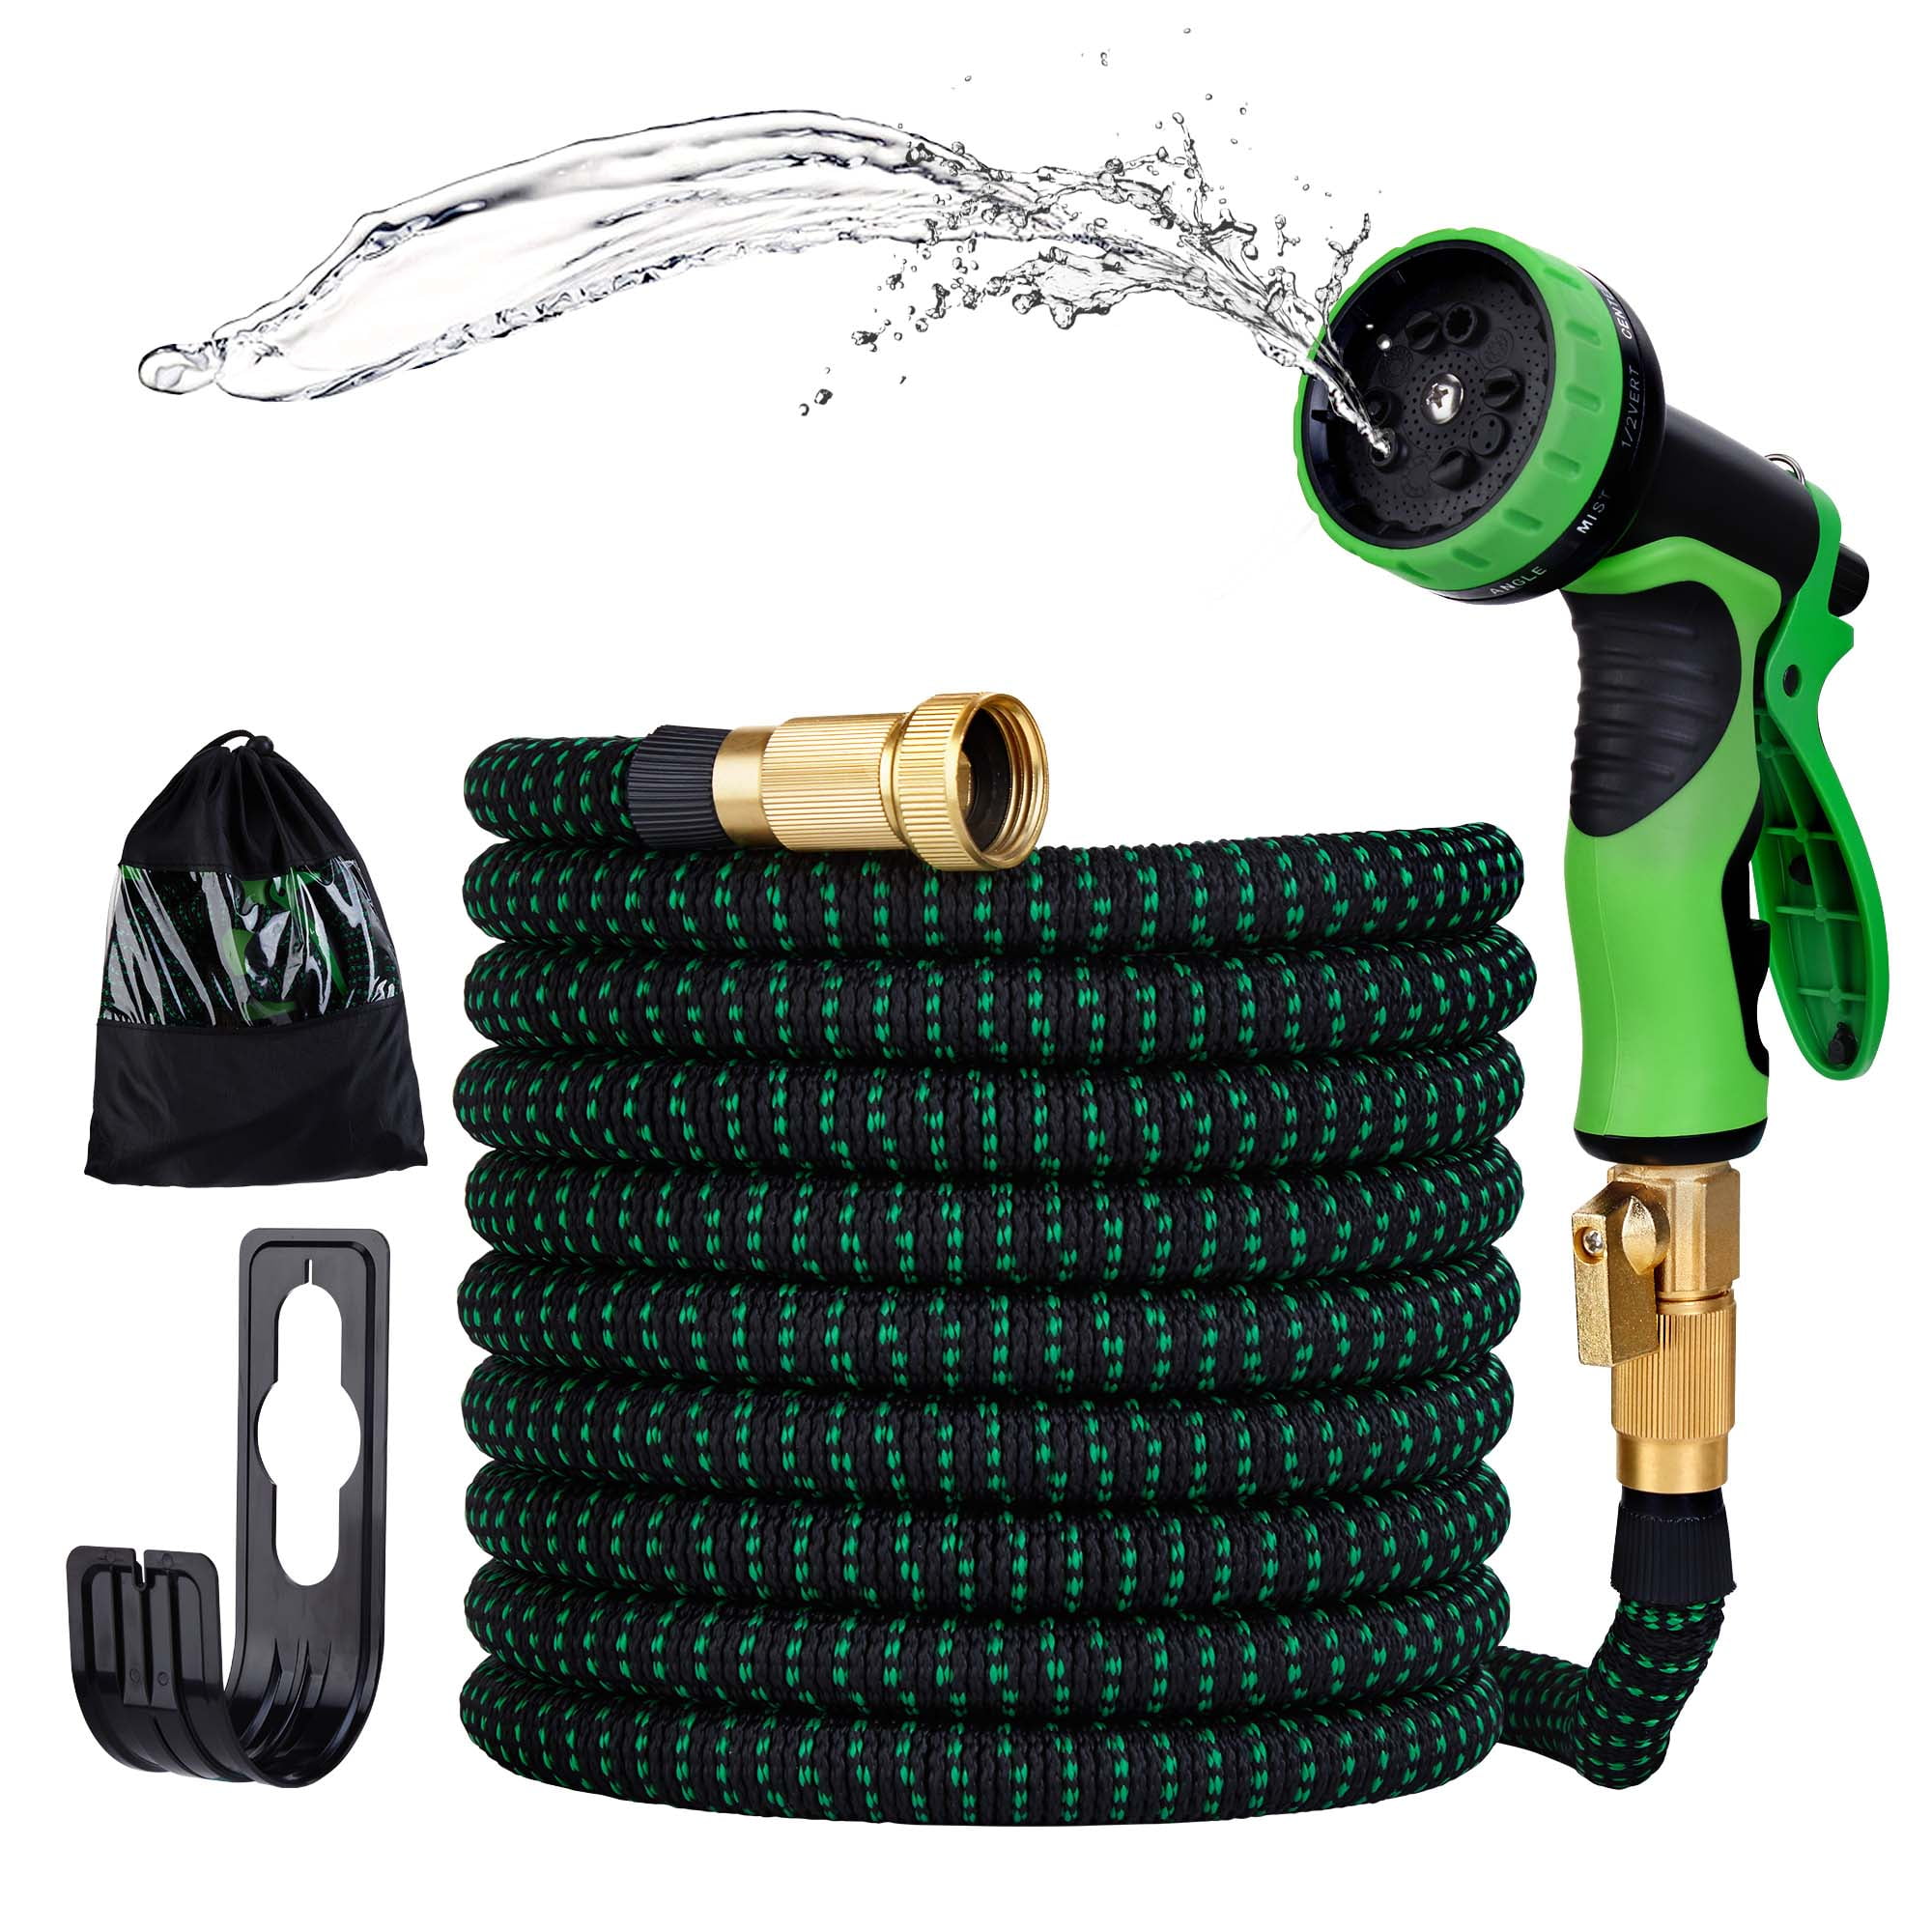 ODYSITE 50ft Garden Hose Water Pipe, Durable Water Hose with 7